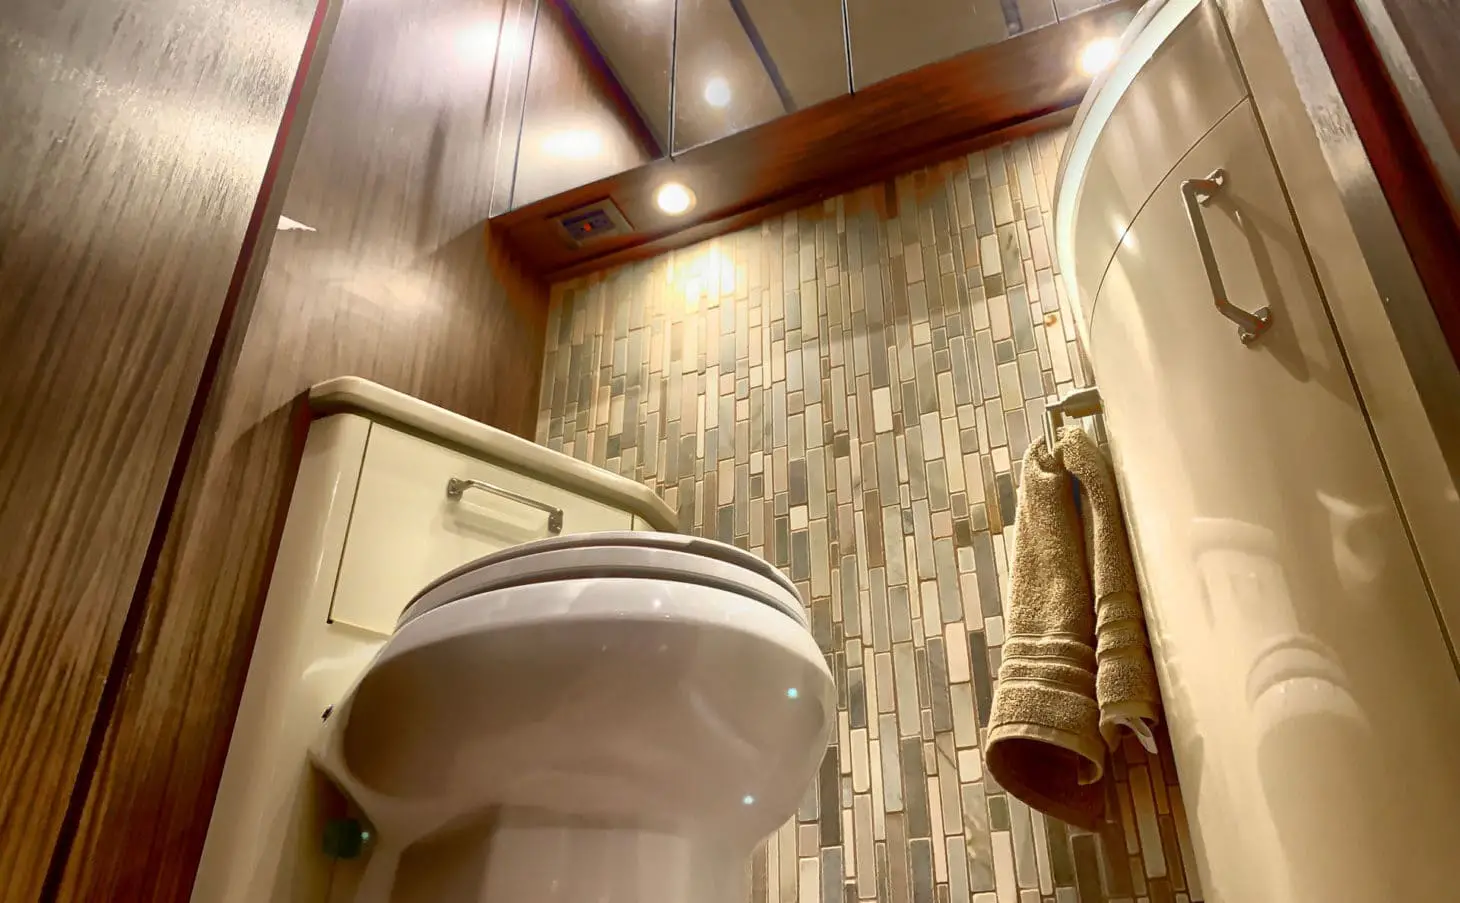 How to Clean An RV Toilet